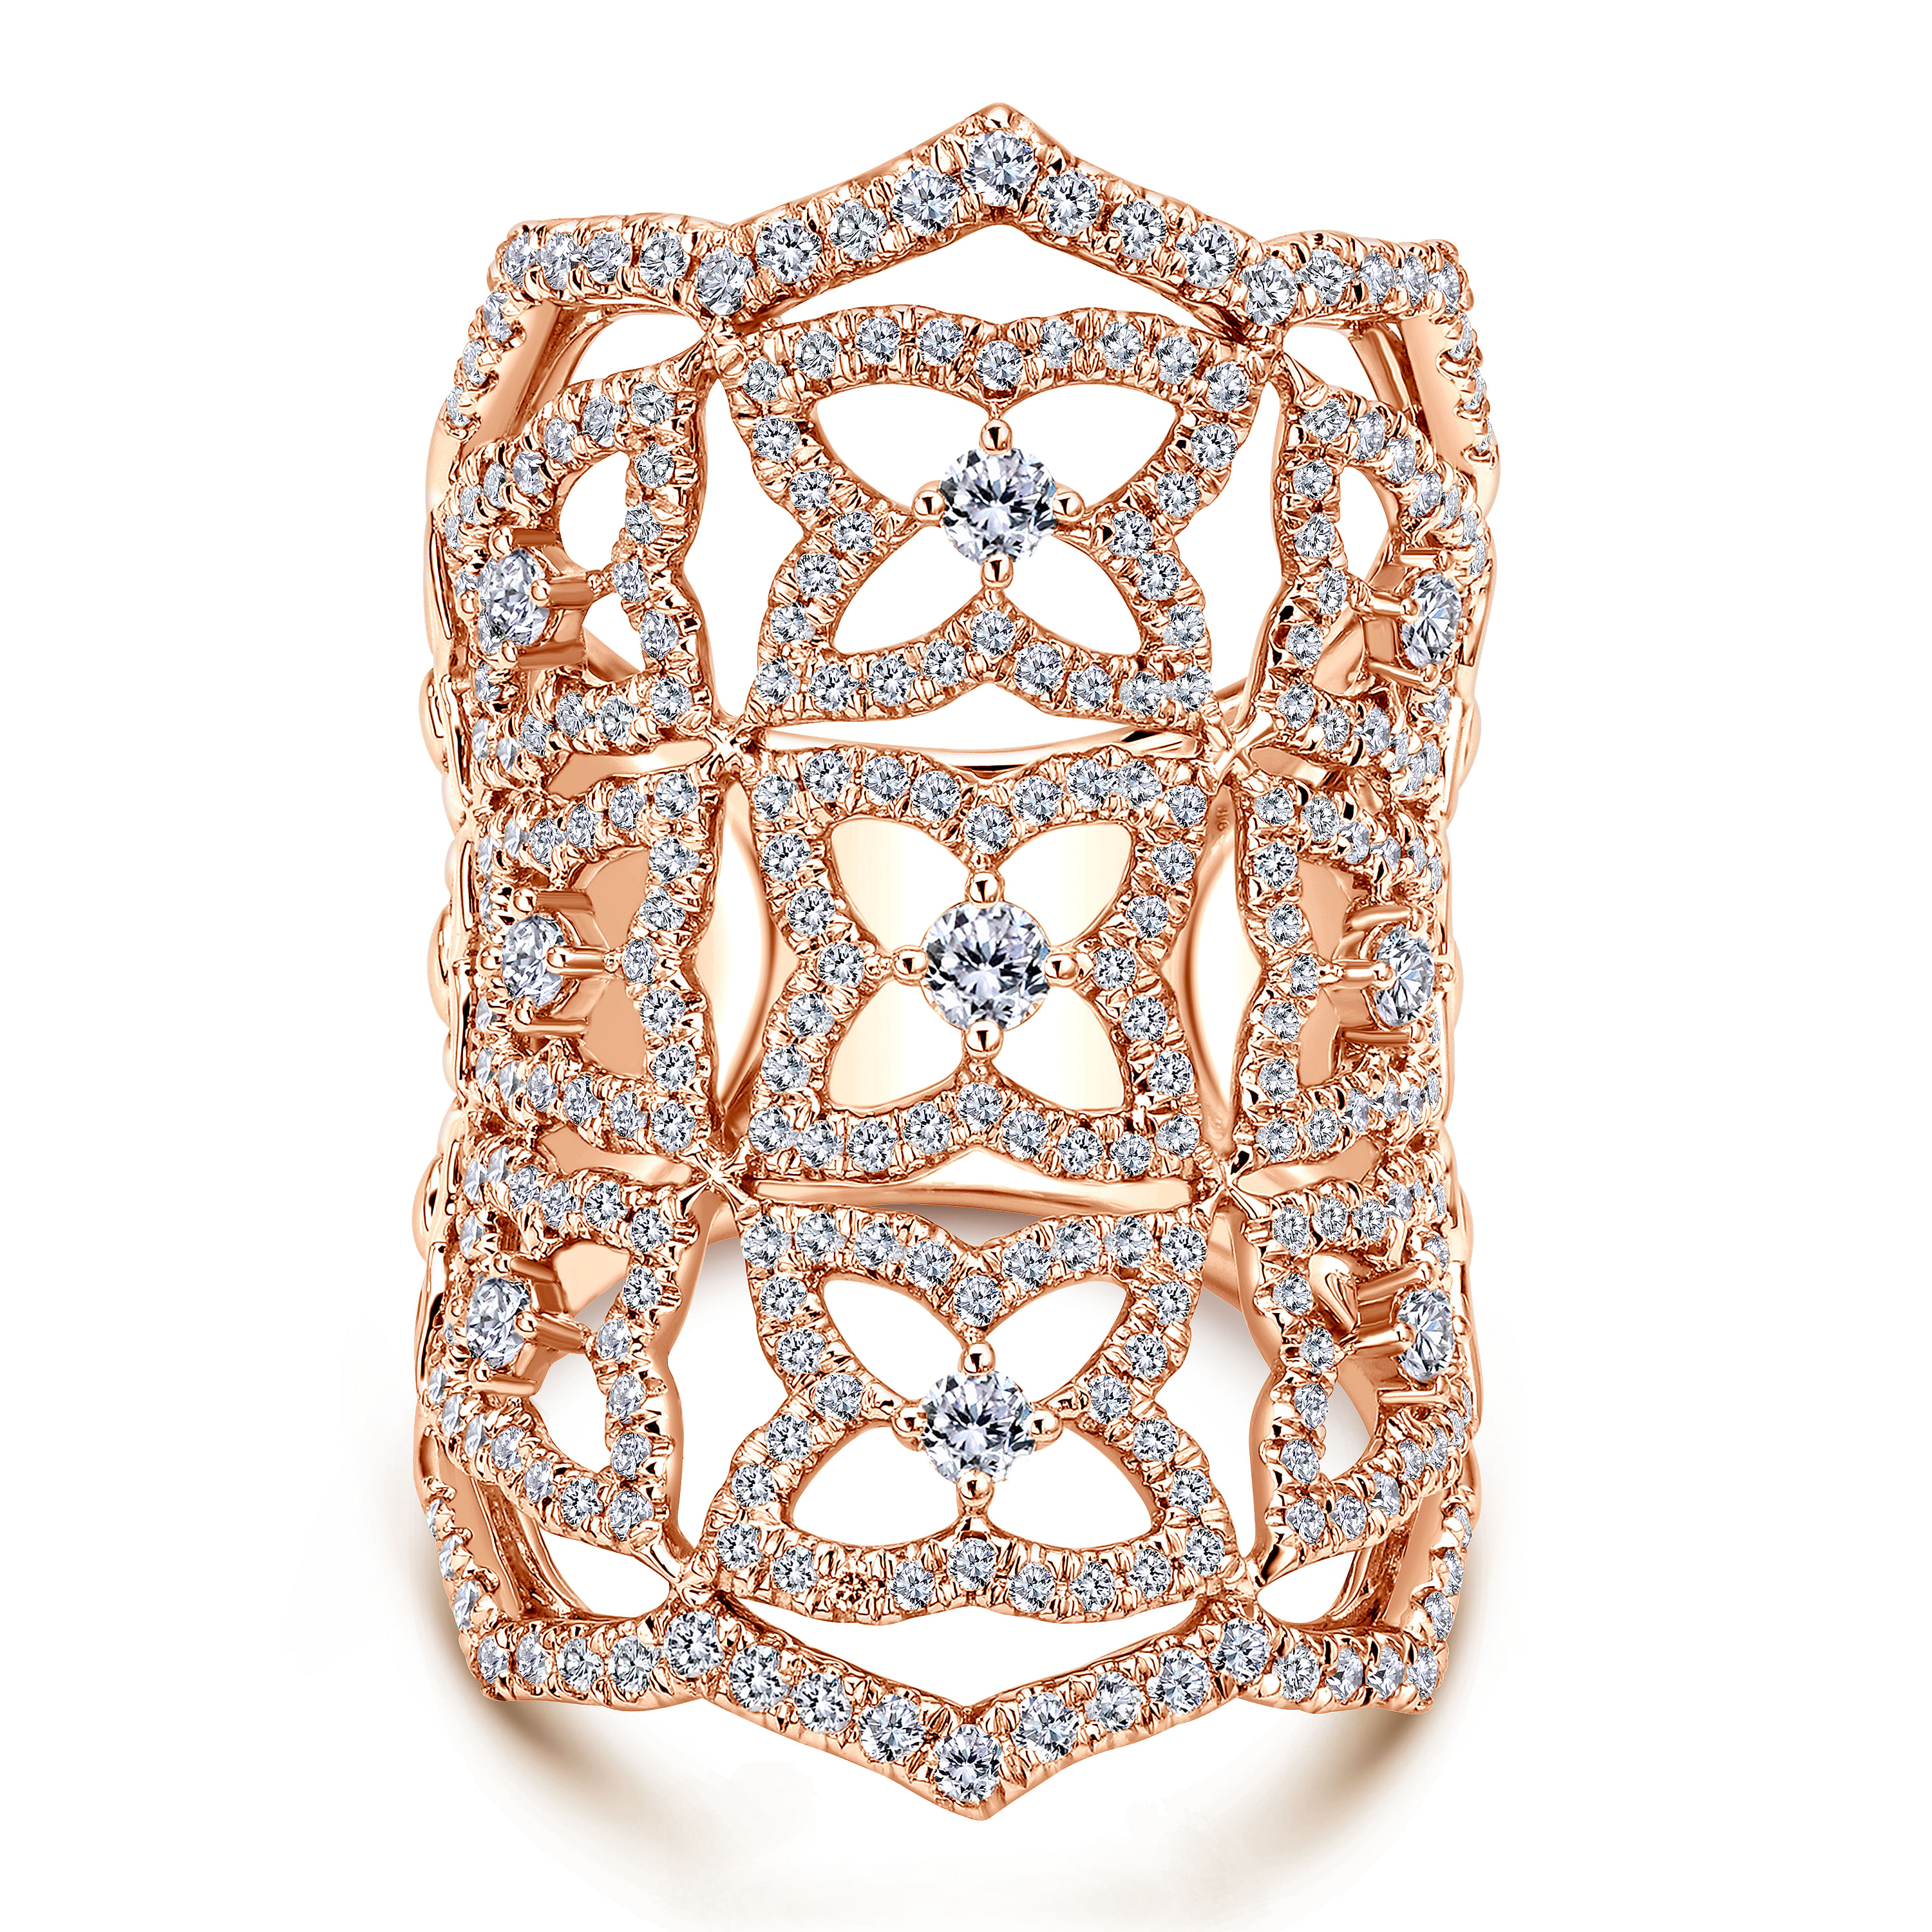 18K Rose Gold Wide Band Openwork Floral Pavé Diamond Armor Ring